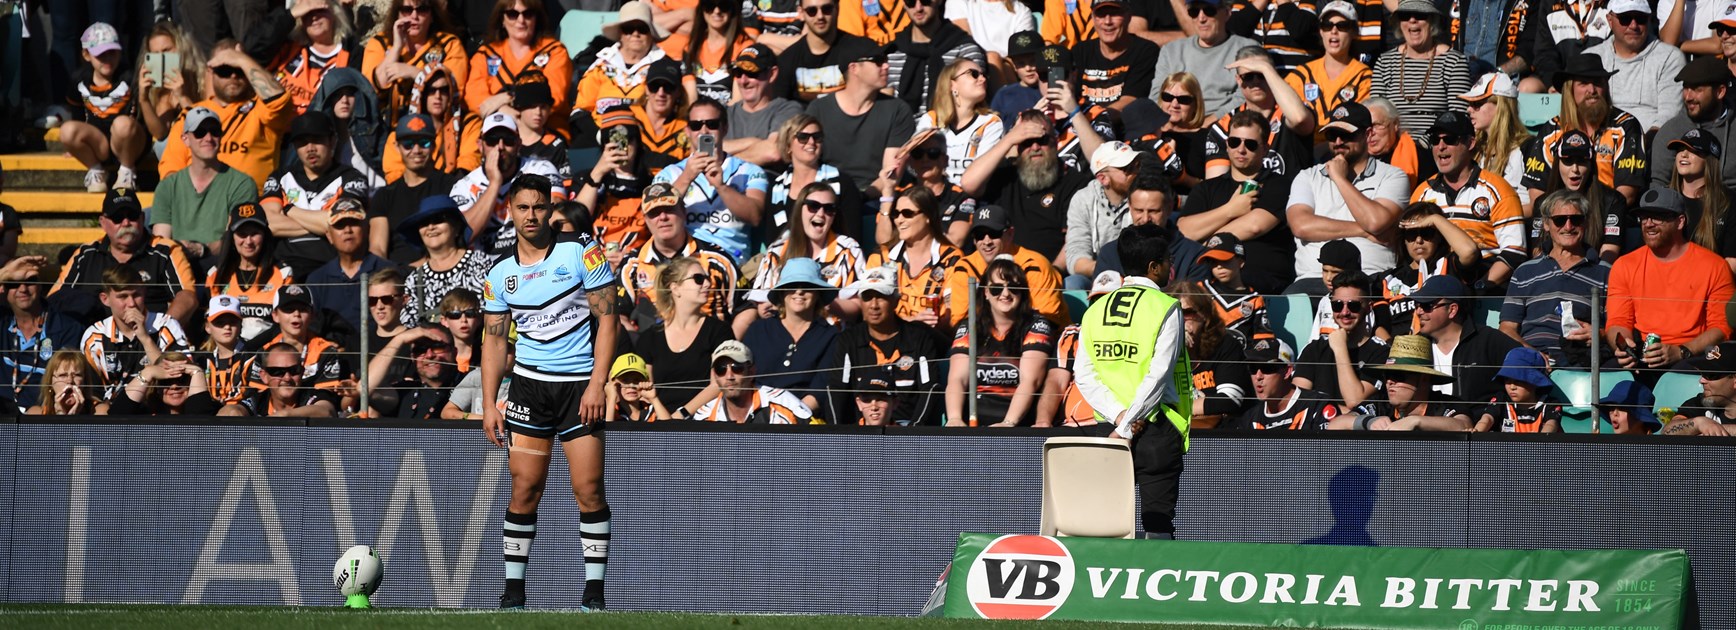 Johnson answers Sharks goal kicking SOS without practice